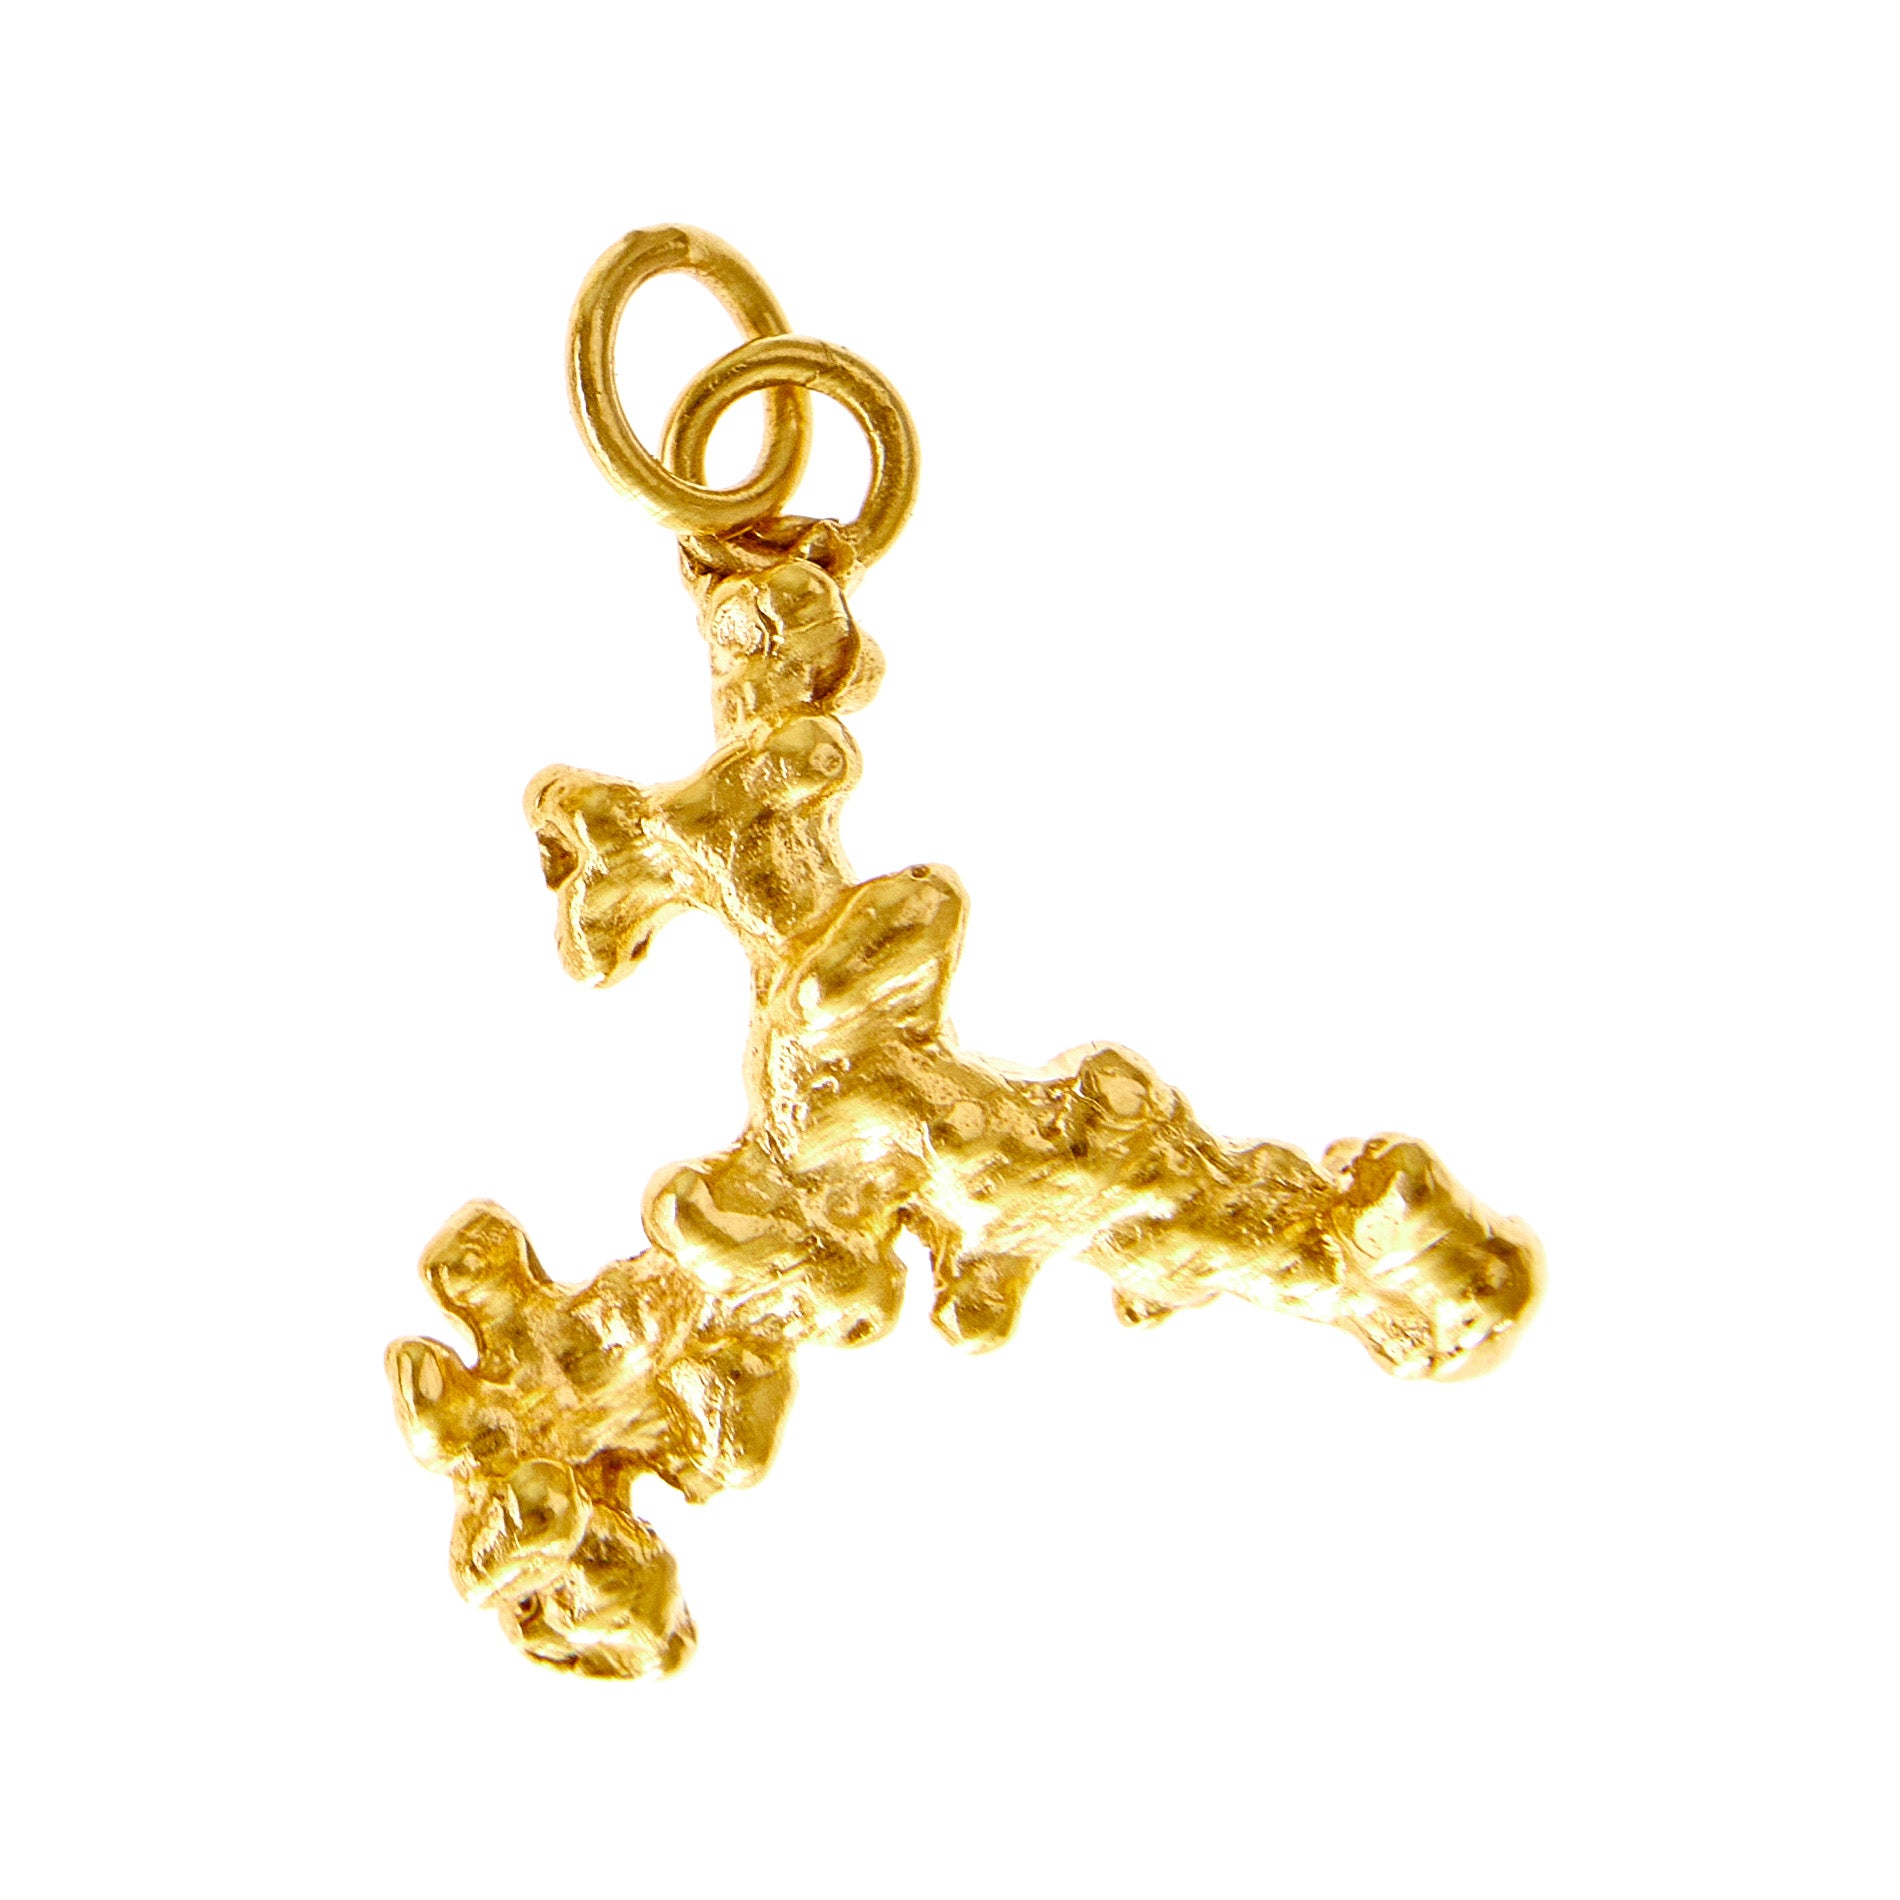 Corallia Phos Charm - Gold Plated Brass